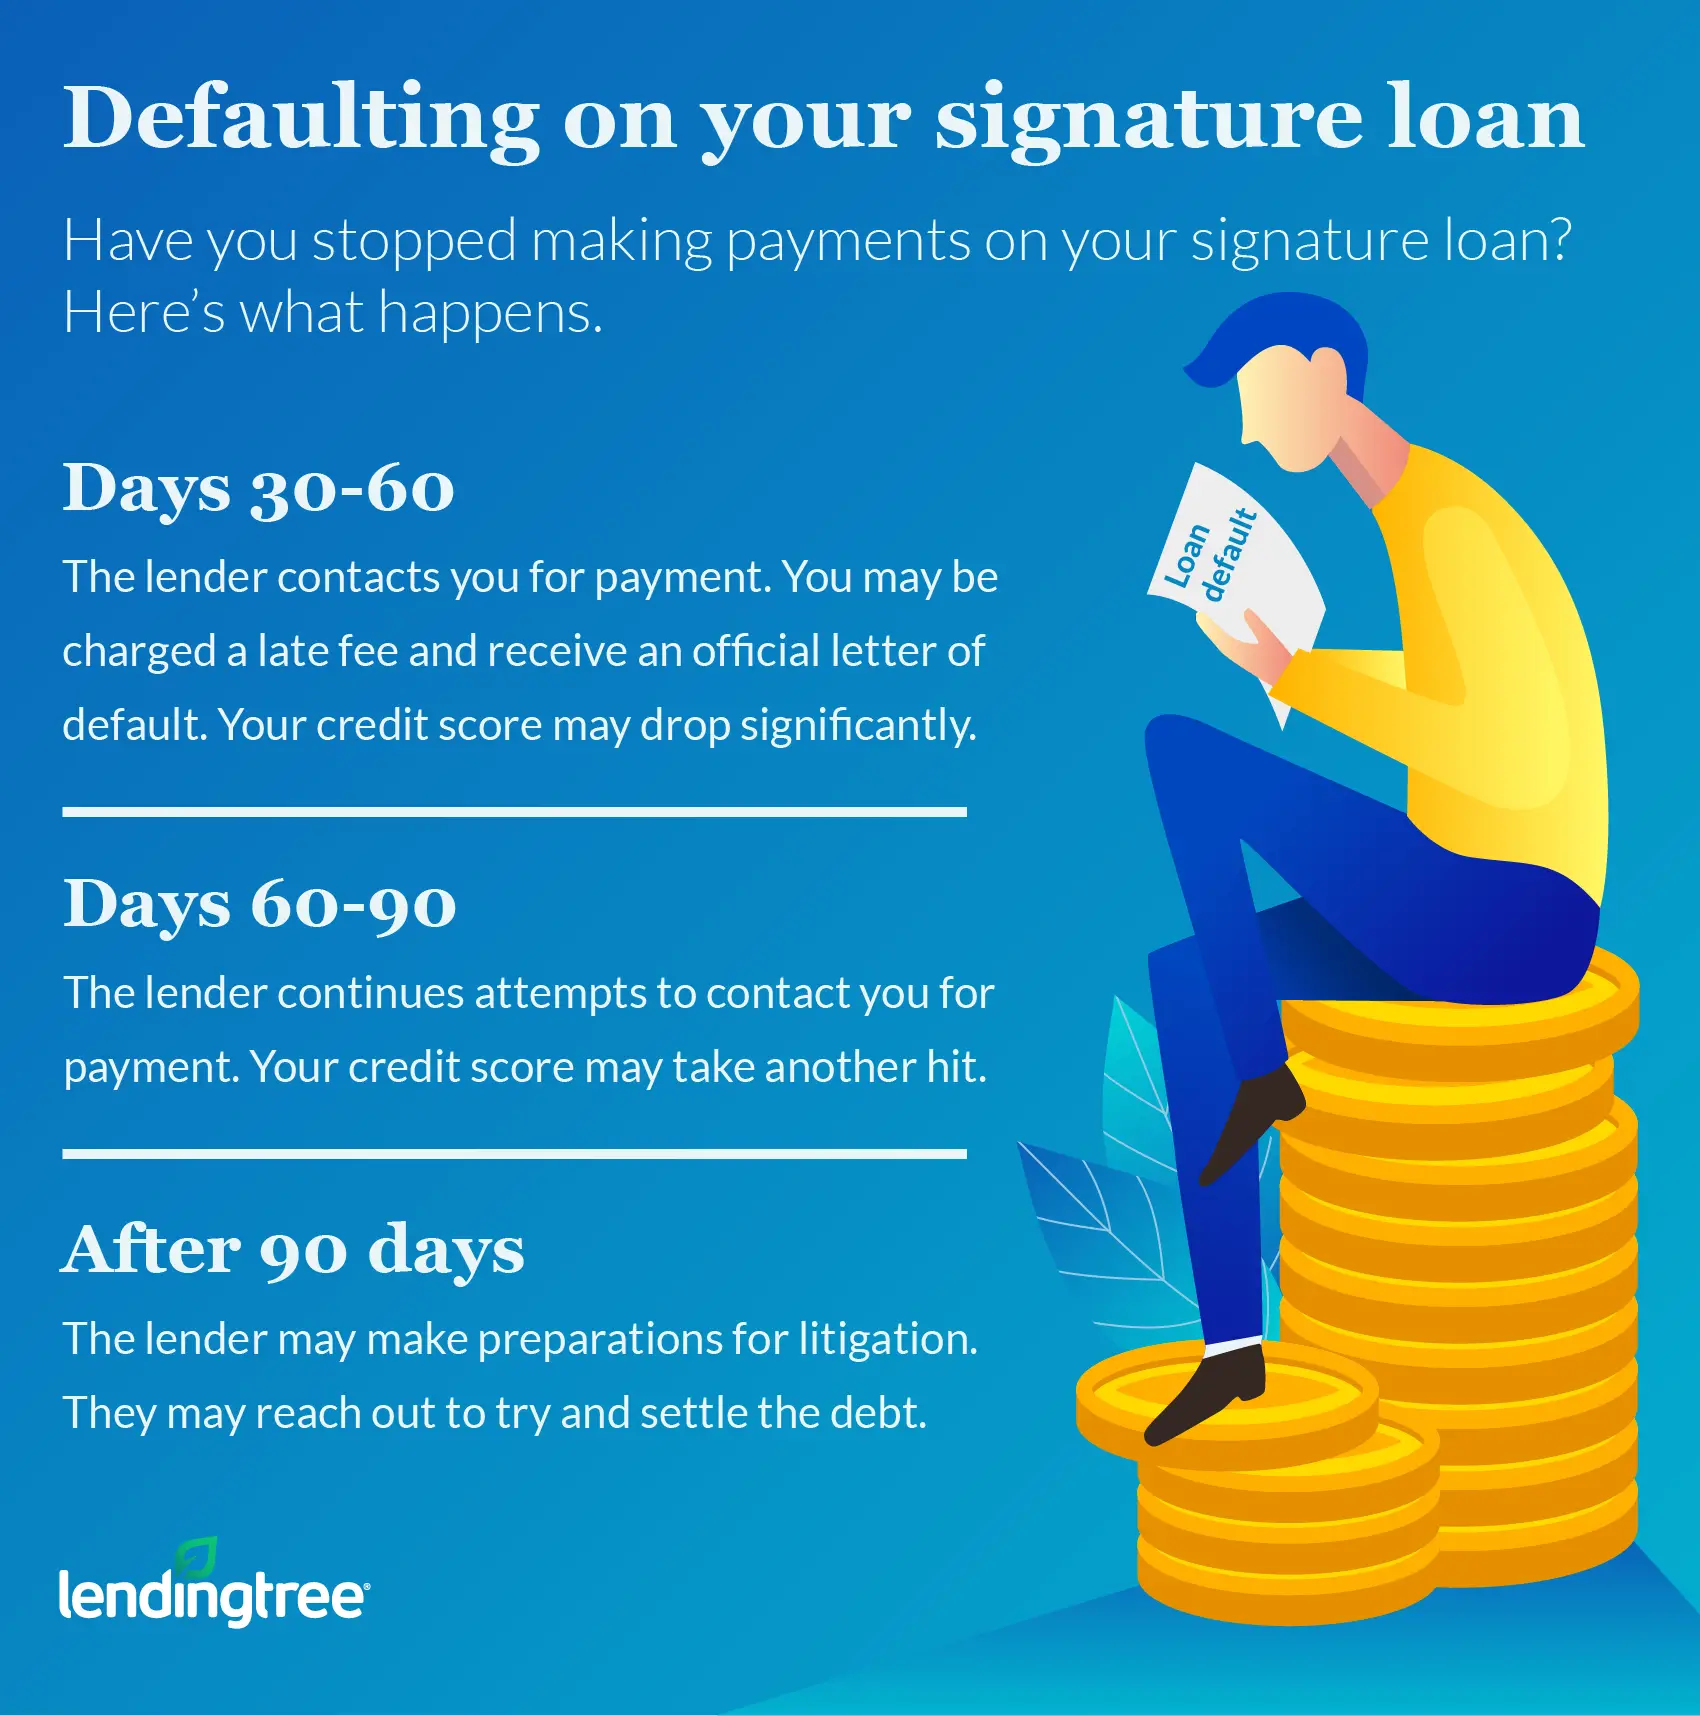 Signature Loans: Heres What Happens If You Default